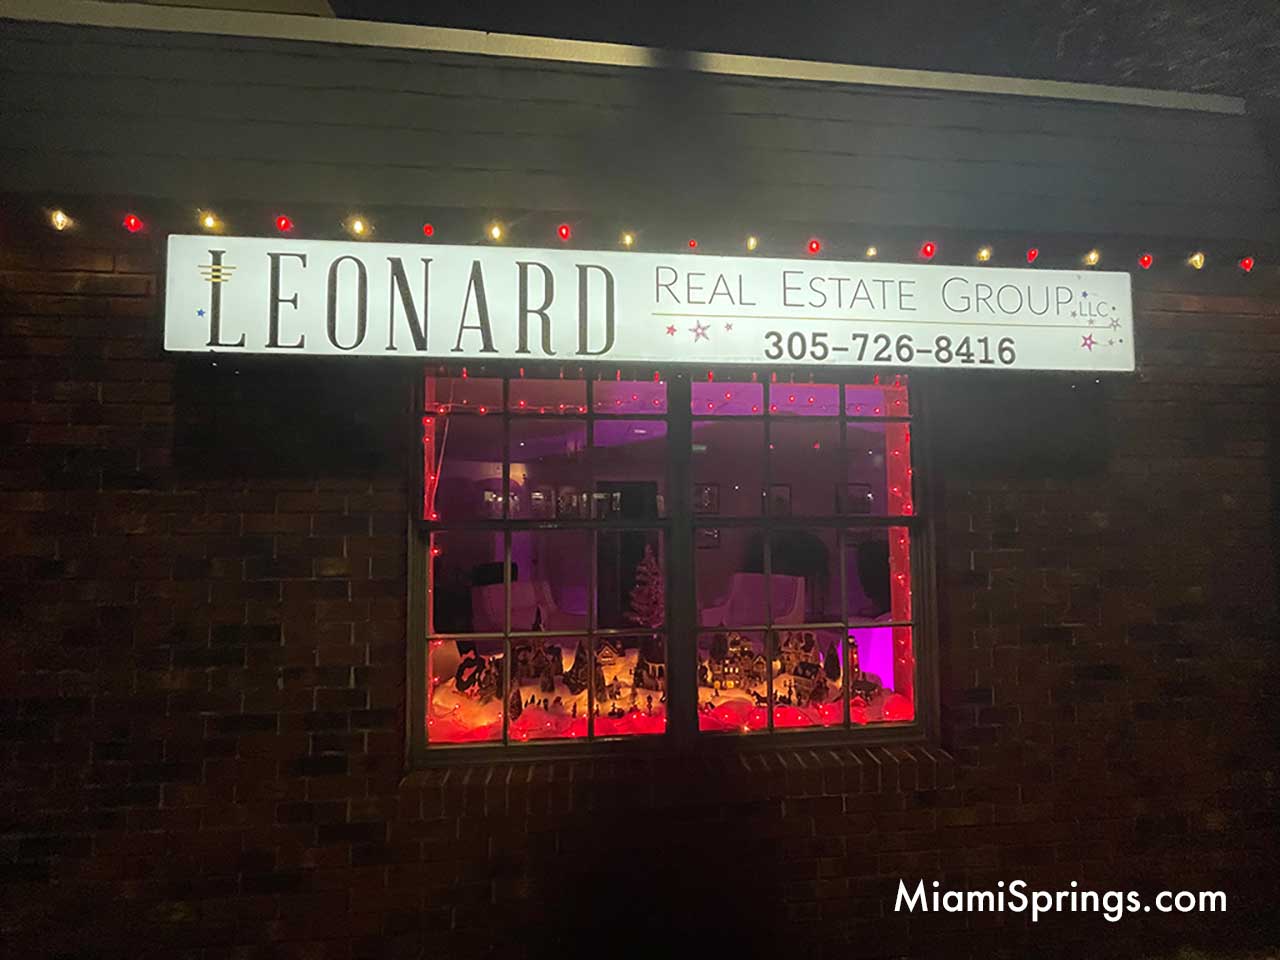 The Leonard Real Estate Group Christmas Decorations